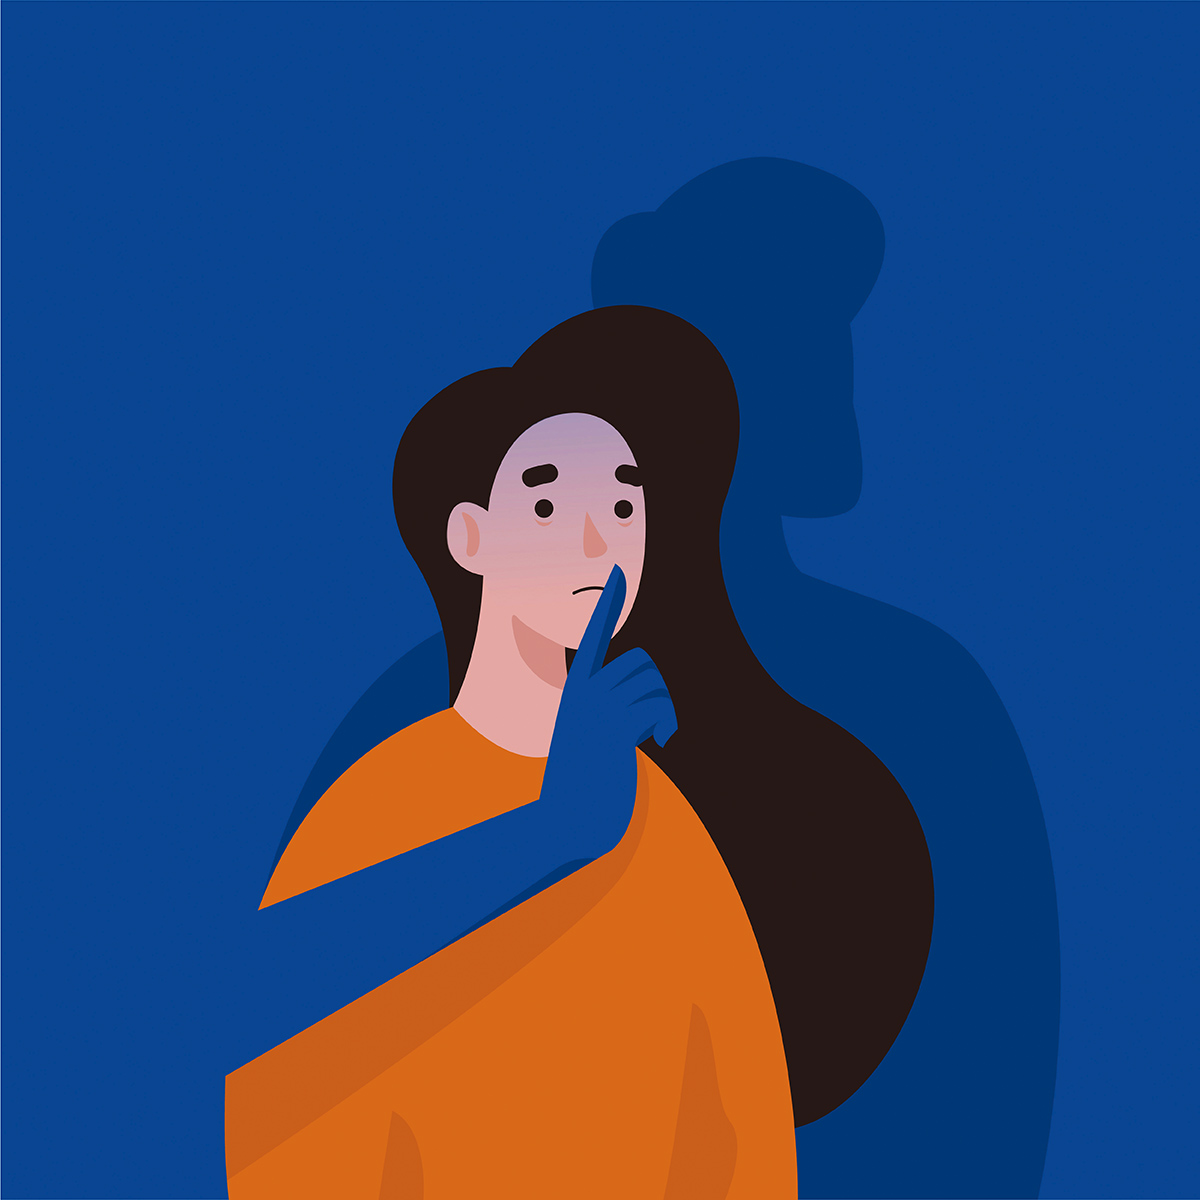 An illustration of a woman with her finger to her lip as if to say "shh"